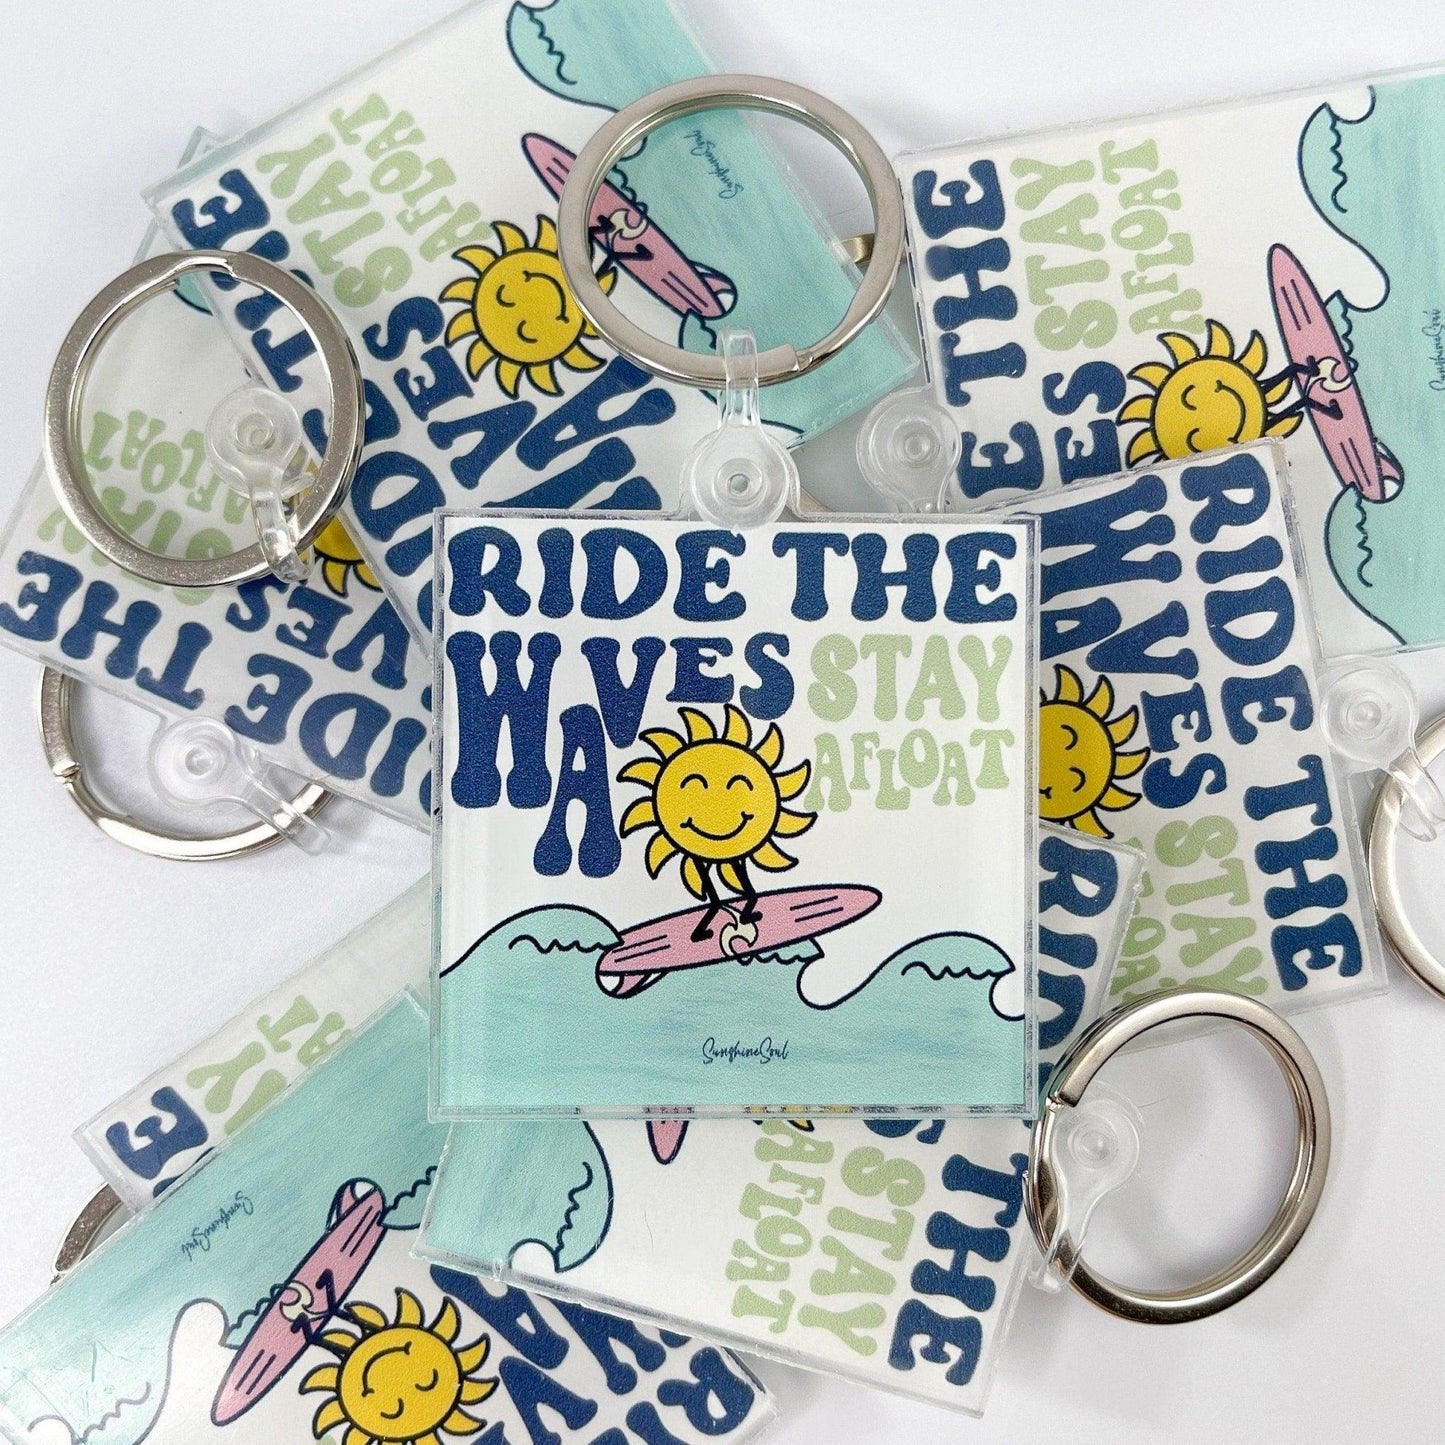 Ride the Waves, Stay Afloat Acrylic Keychain - Sunshine Soul MD